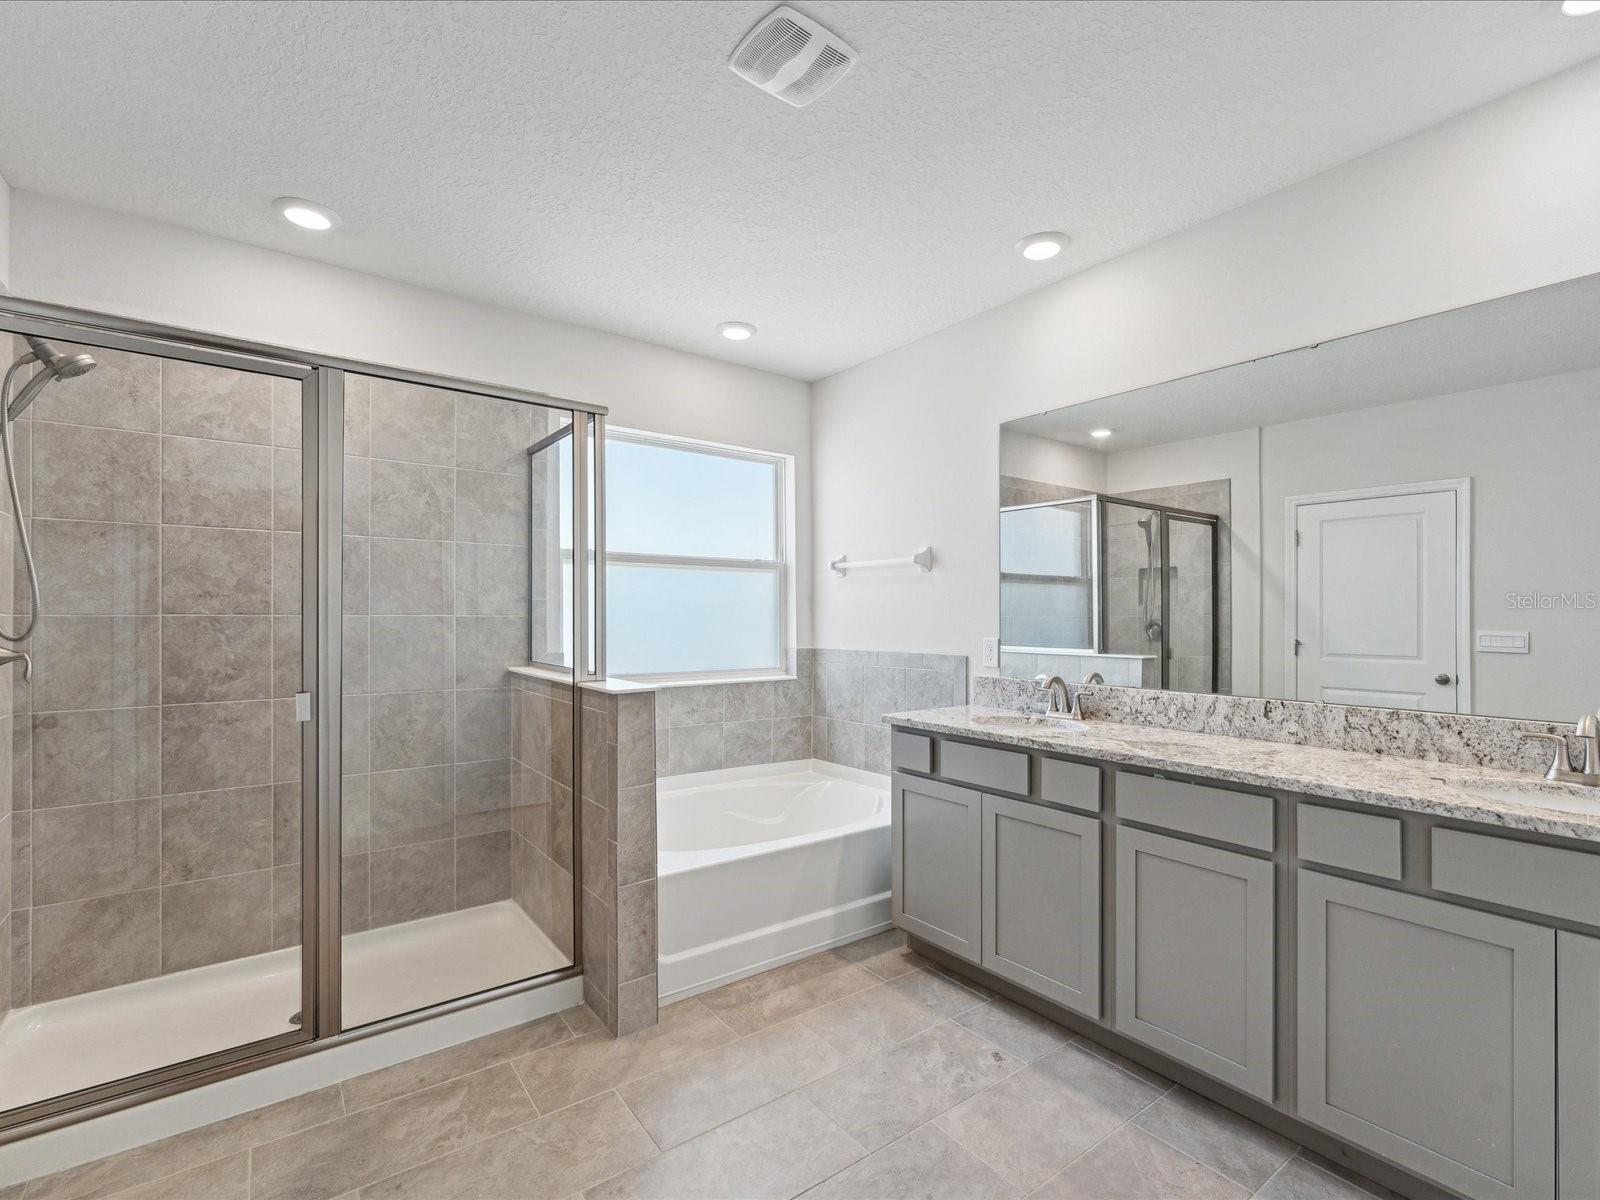 The ensuite bathroom consists of double sinks, cabinetry, shower with glass door, tub, and the second walk-in closet.